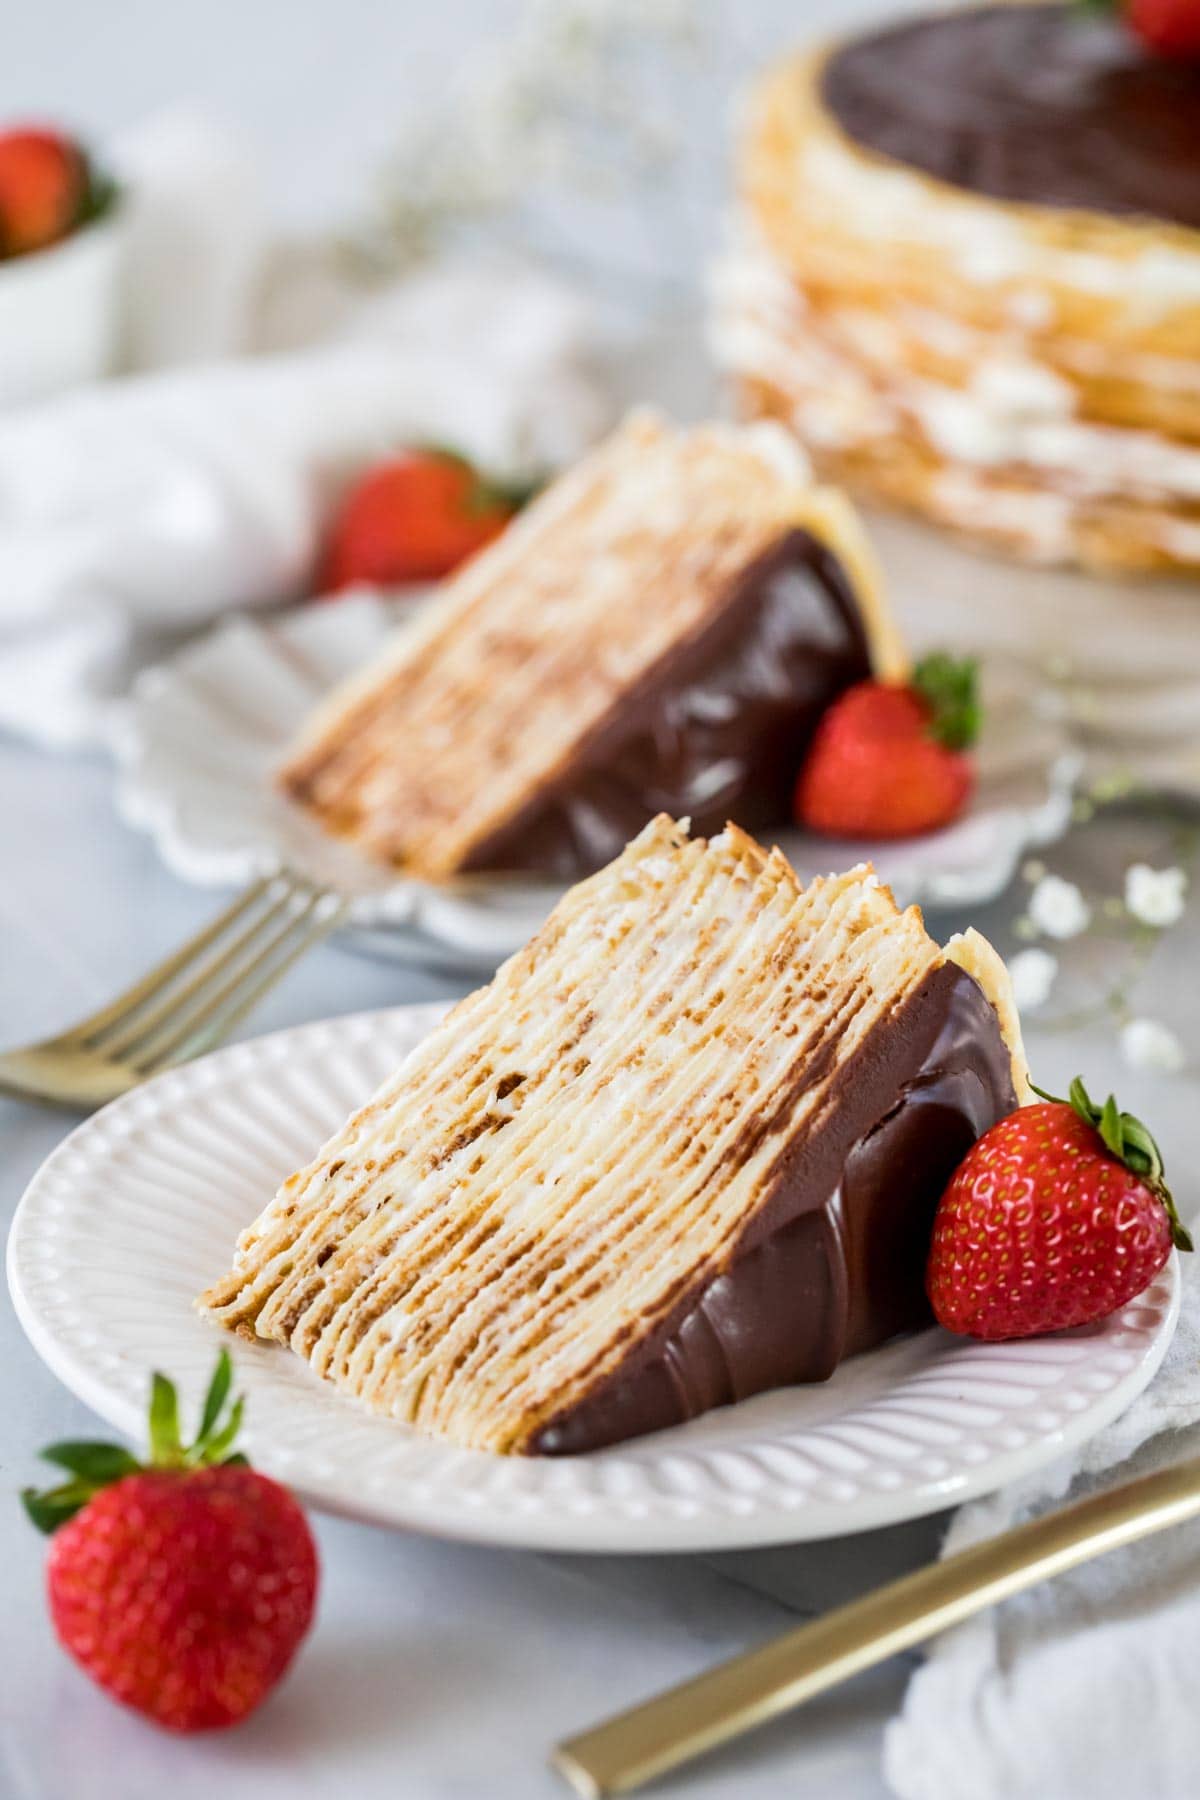 Slices of crepe cake topped with chocolate ganache on white plates.